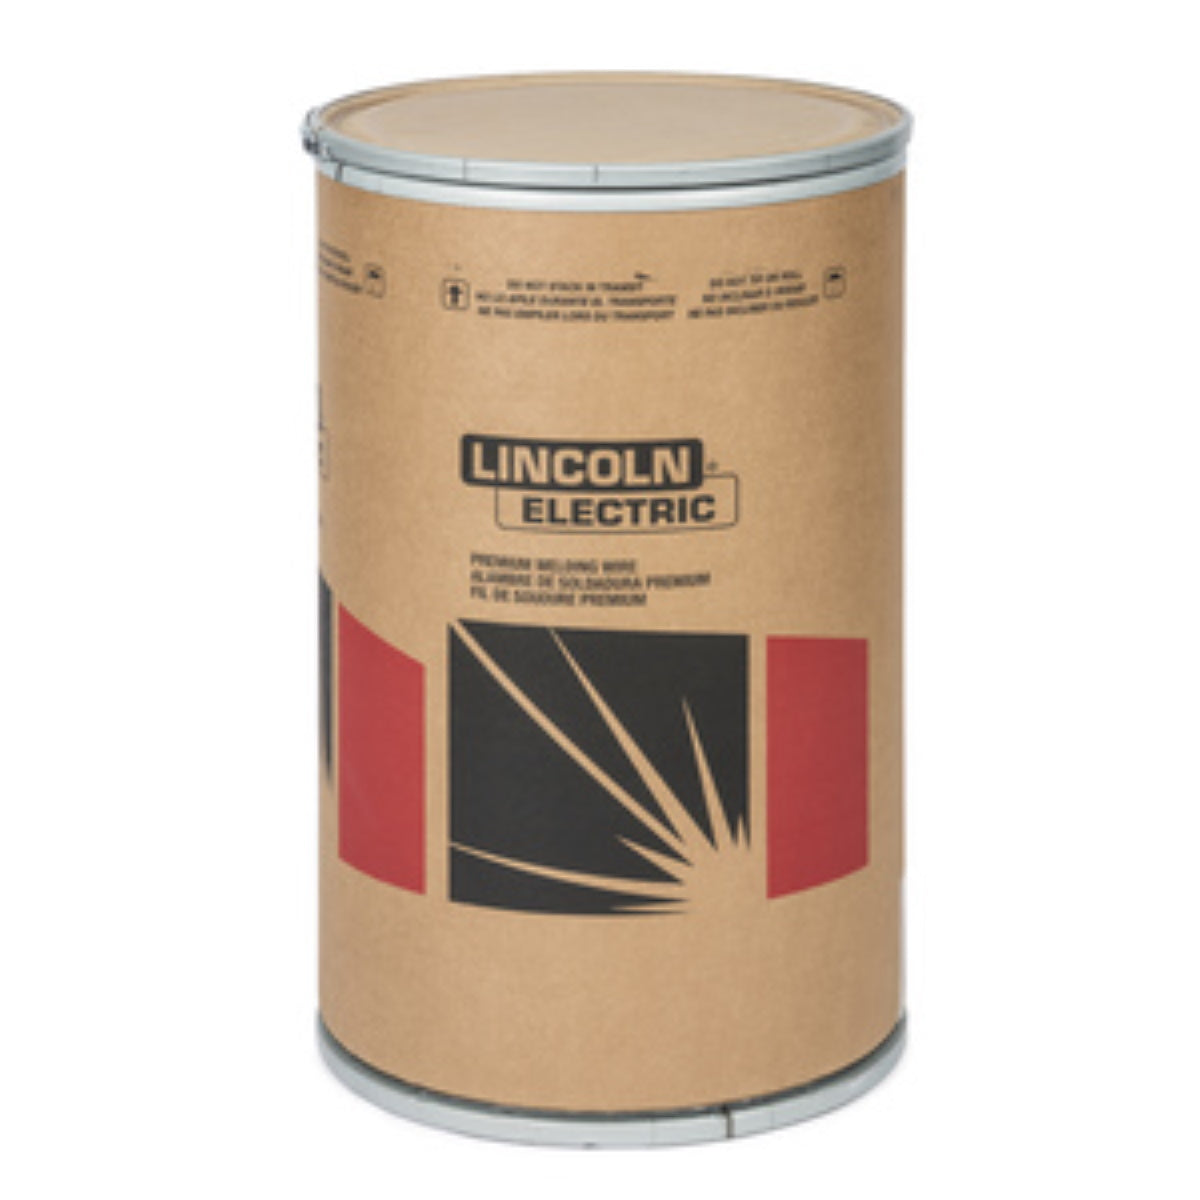 Lincoln Murex 316LSI Stainless MIG Wire .045 500lb Drum (ED0035615)